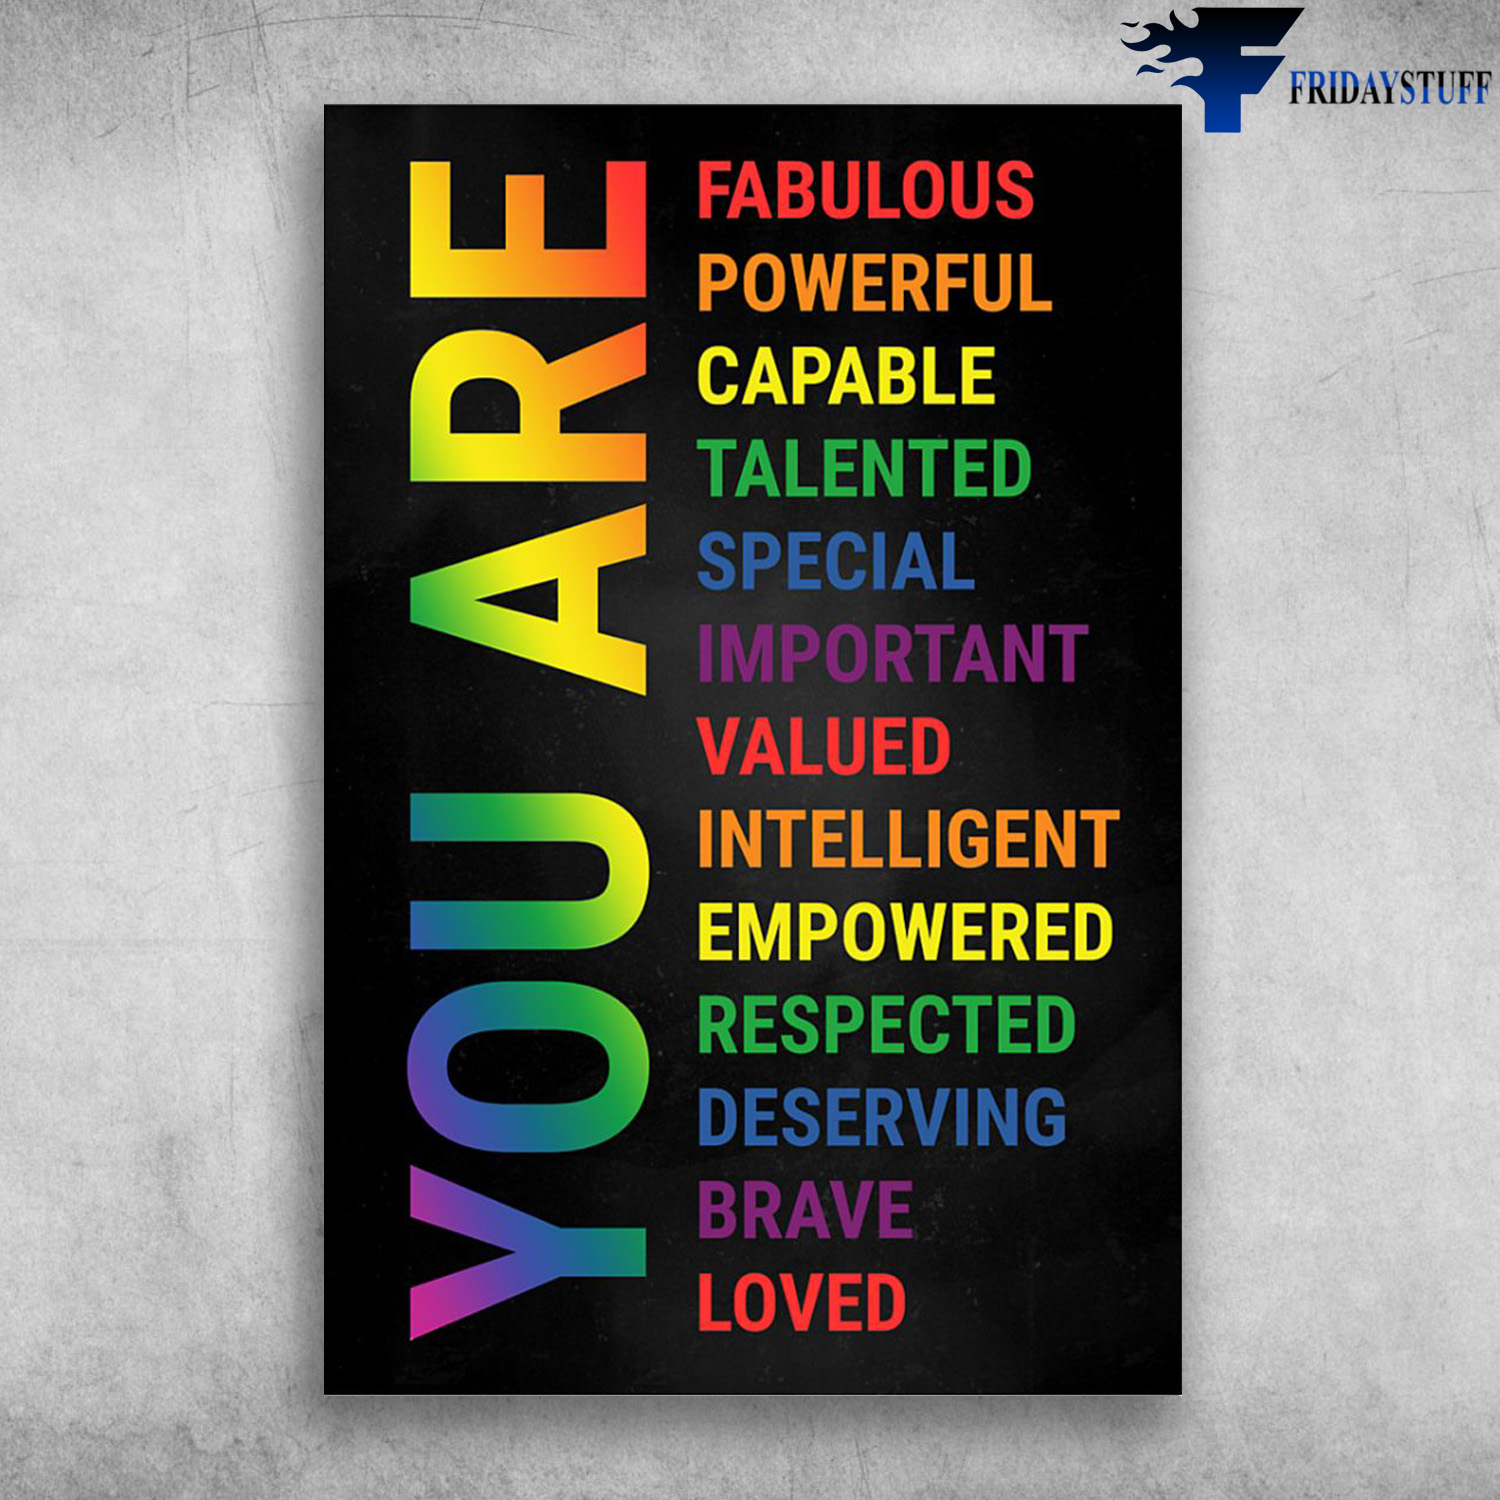 You Are Fabulous, Powerful, Capable, Talented, Special. Important, Valued, Intelligent, Empowered, Respected, Deserving, Brave, Loved